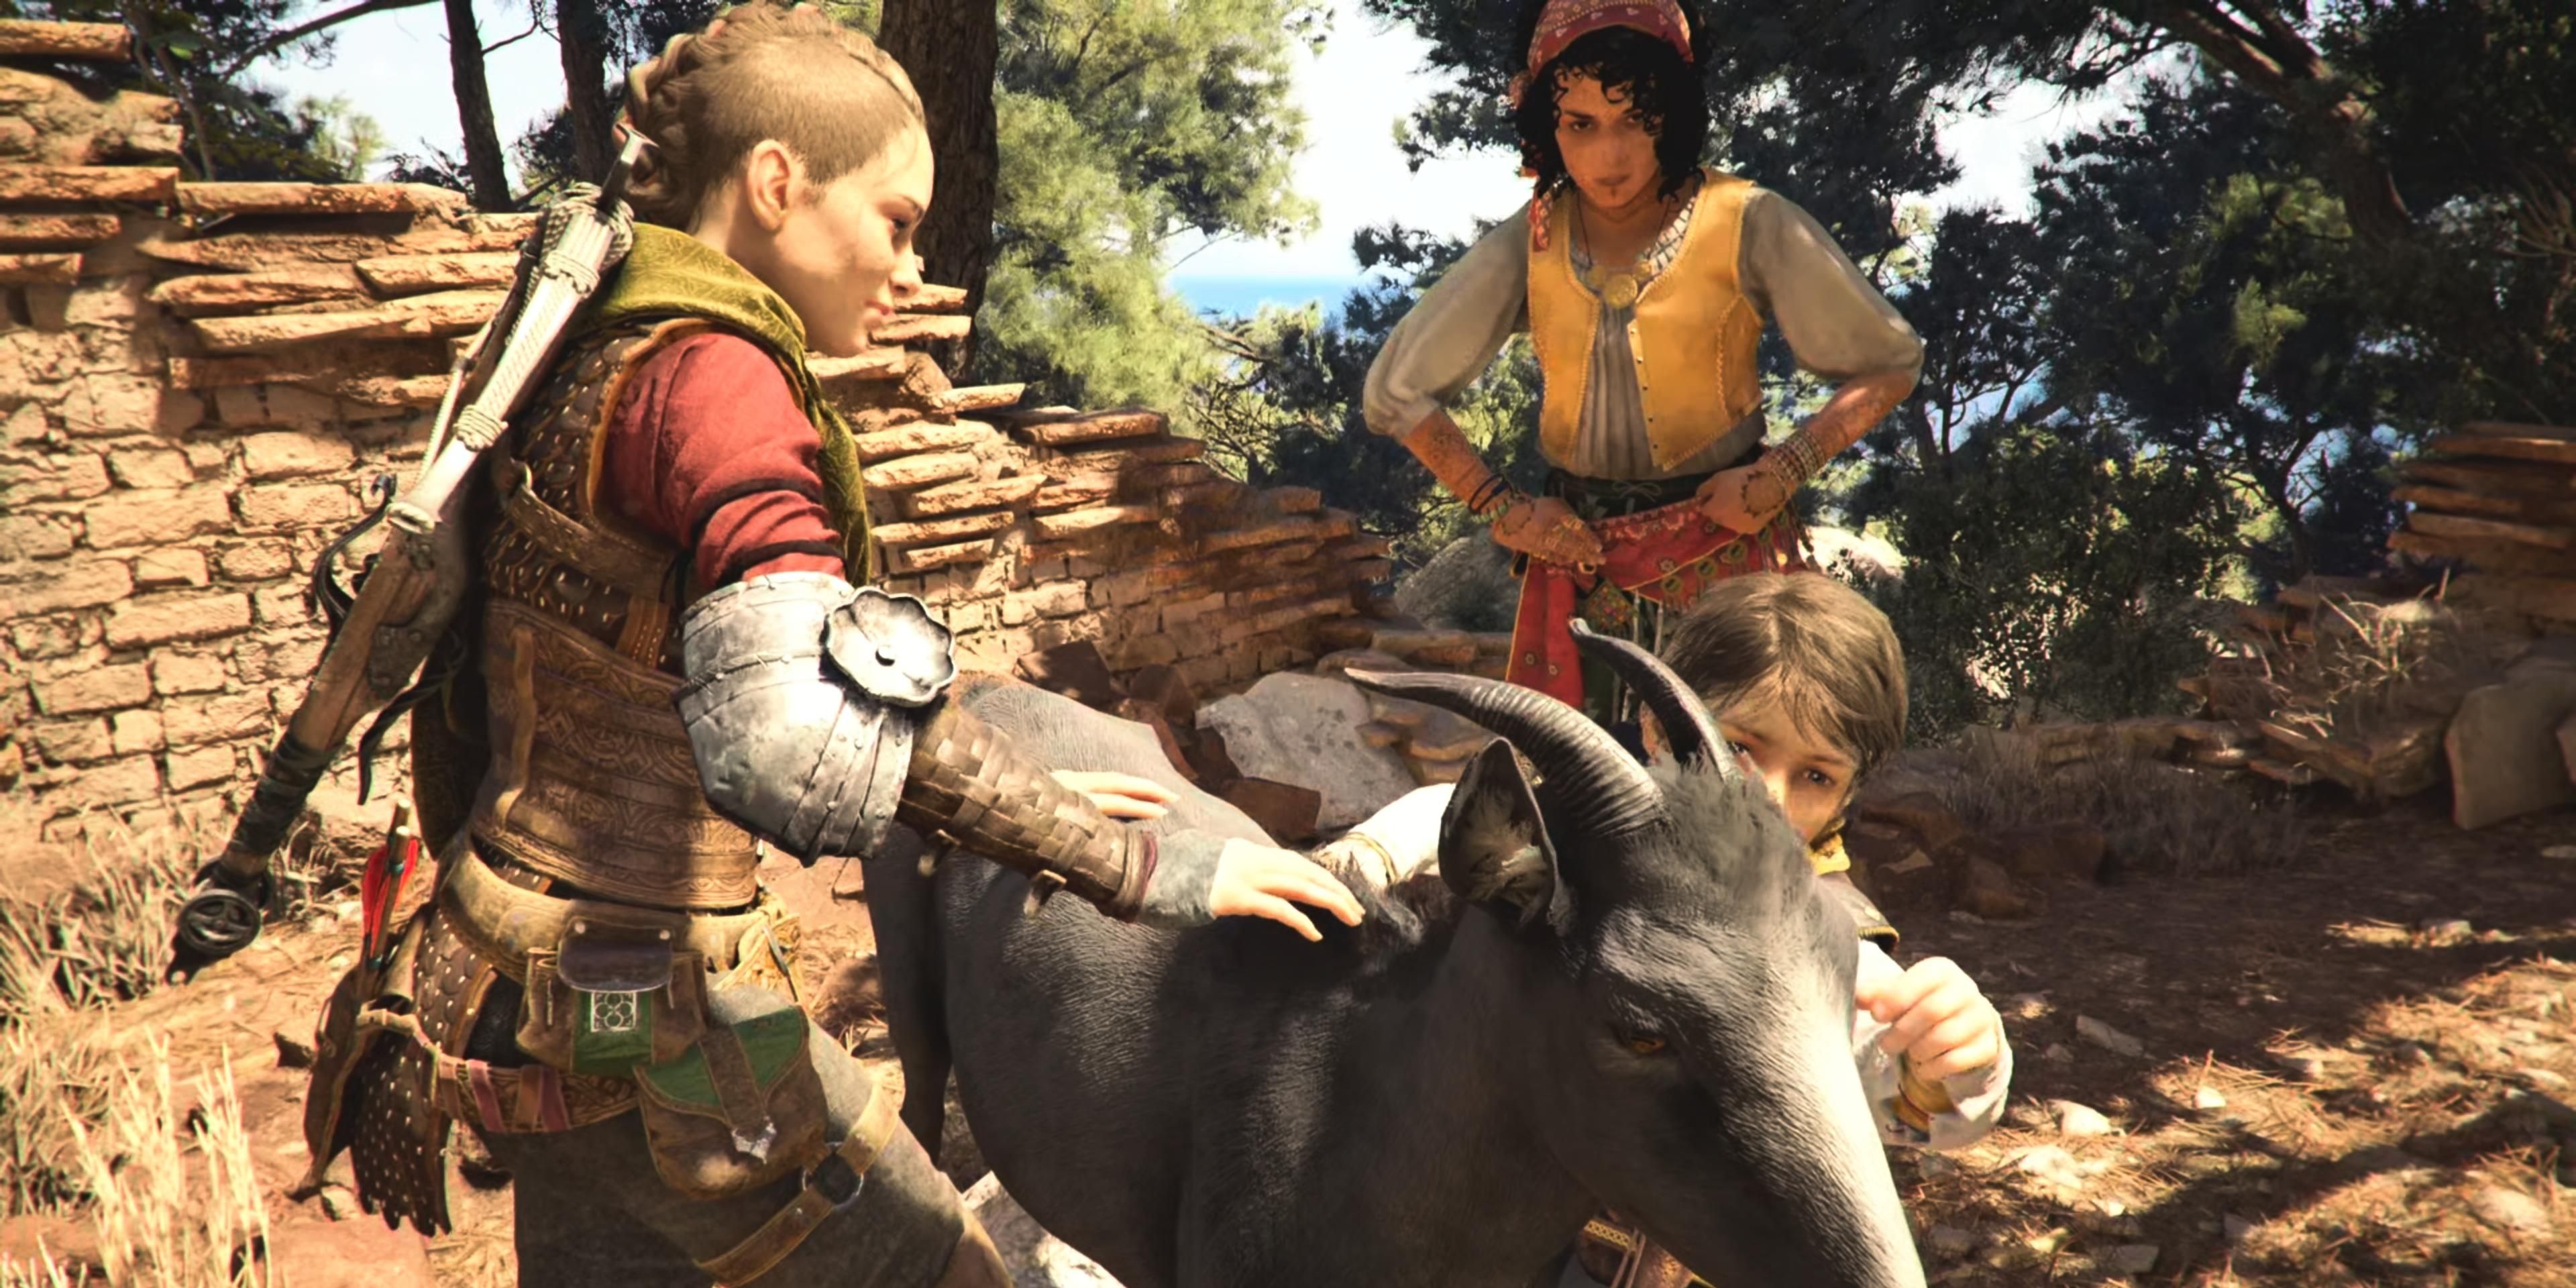 amicia, hugo, and sophia finding the missing goat